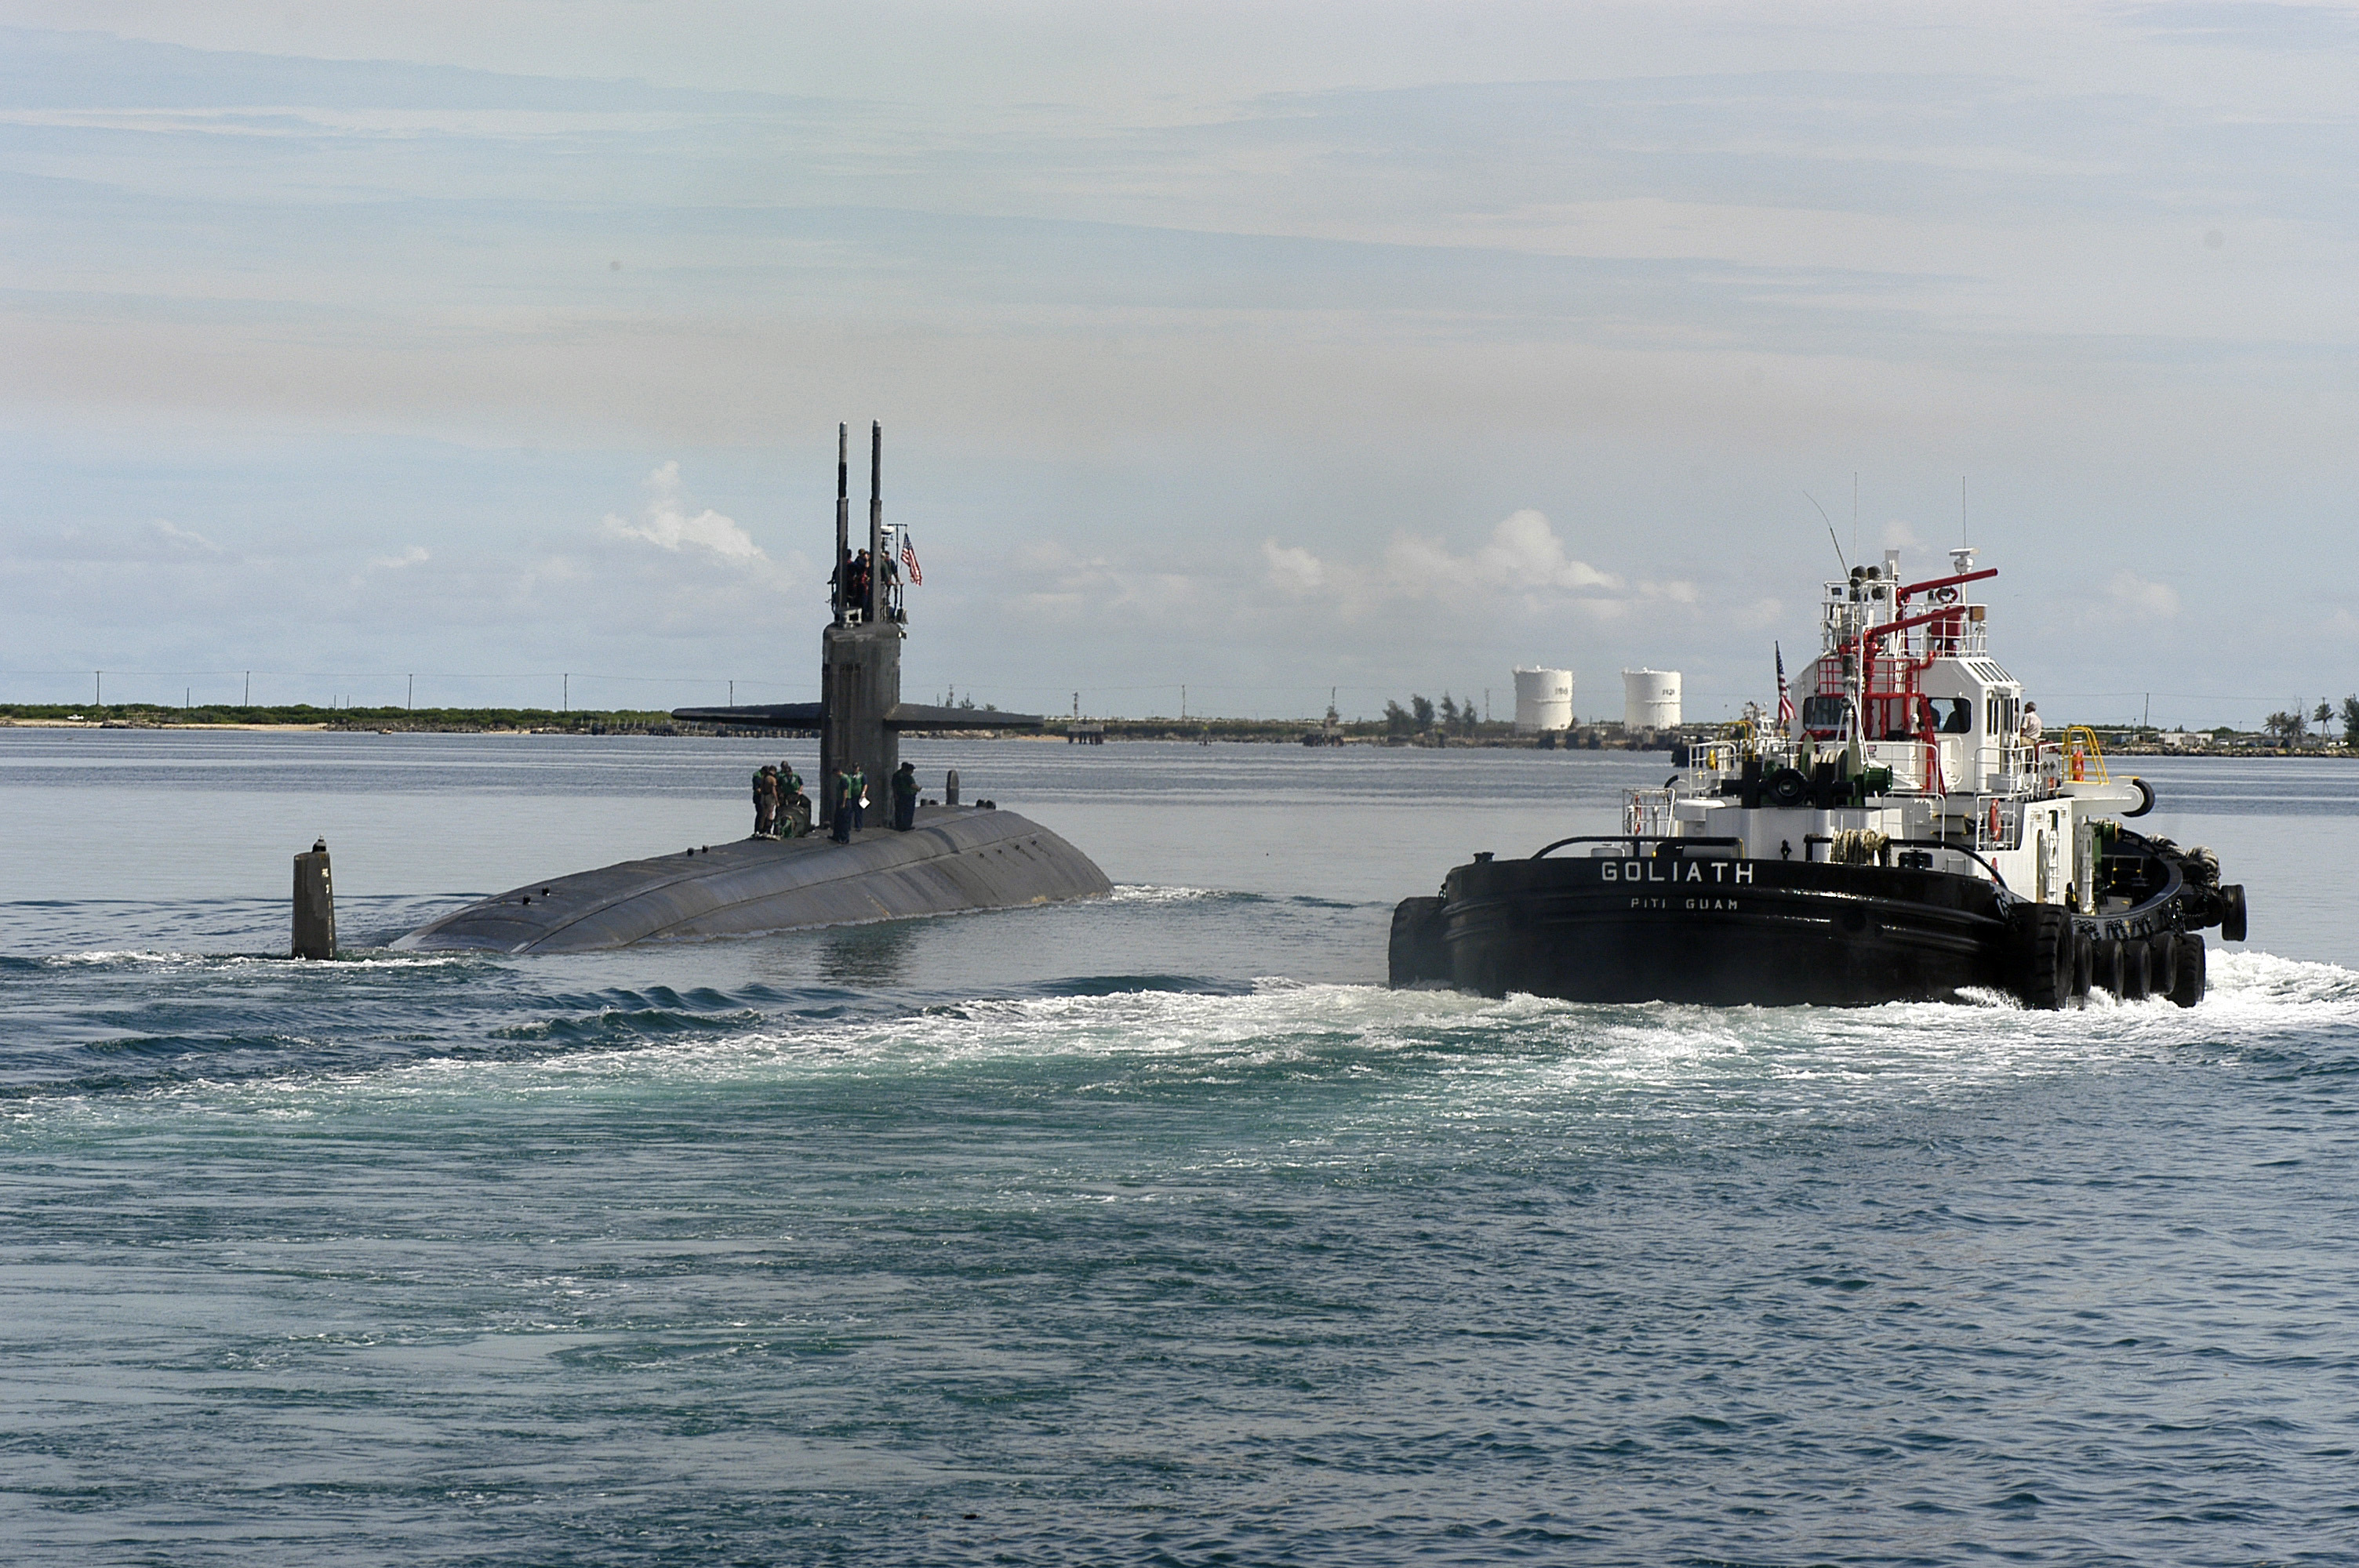 US Navy 050817-N-7293M-111 The Los Angeles-class attack submarine USS San Francisco (SSN 711) departs its former homeport of Apra Harbor, Guam